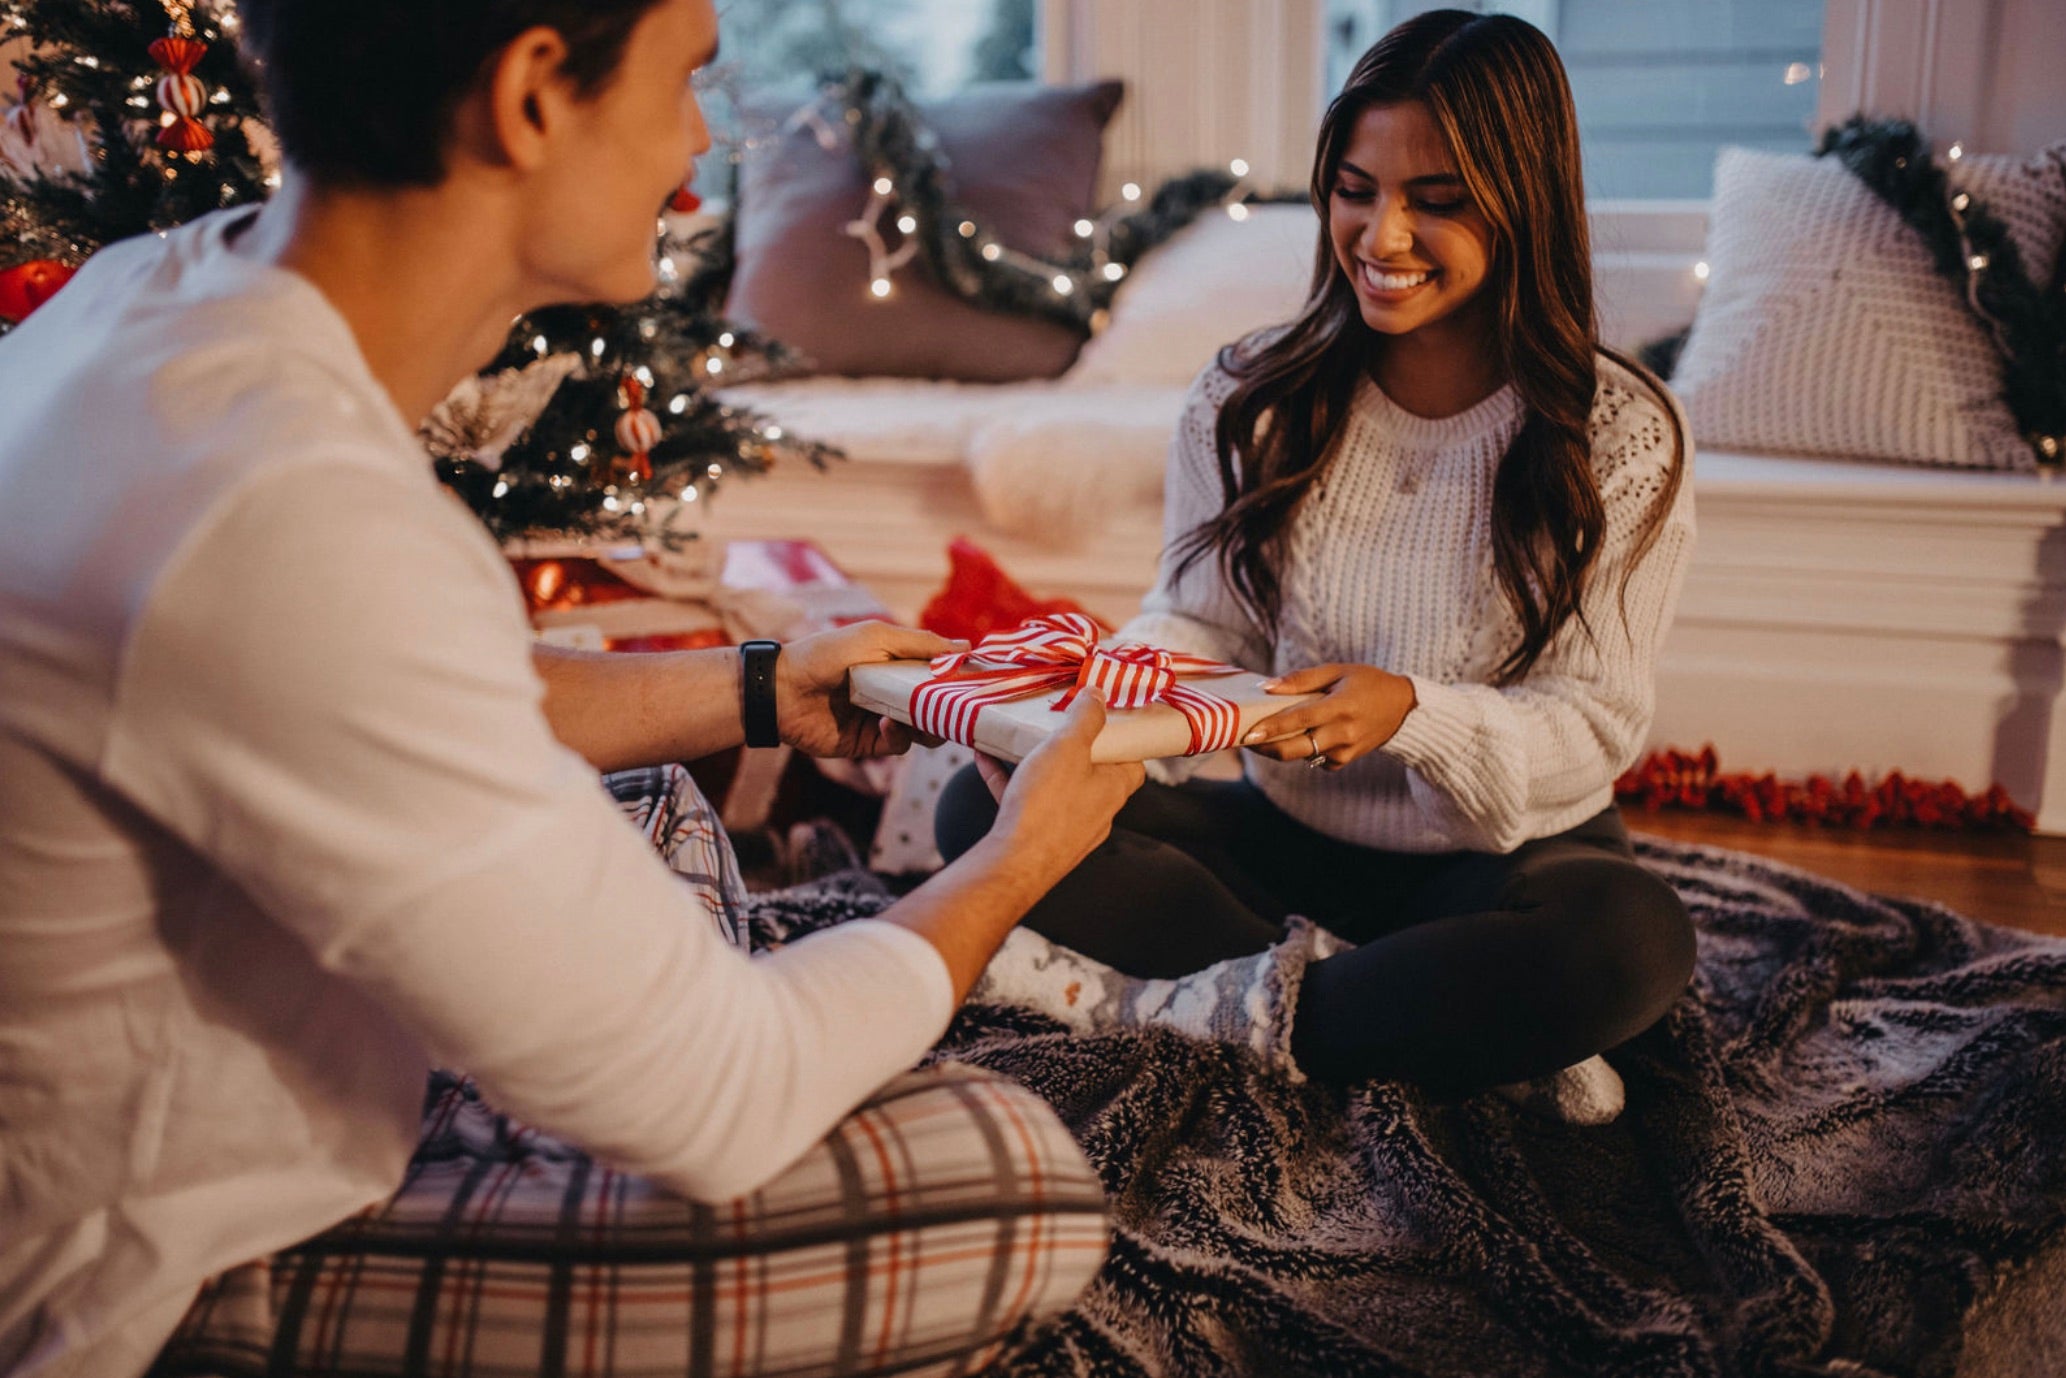 What to be my girlfriend proposal?  Girlfriend proposal, Gf proposal  ideas, Christmas gifts for girlfriend